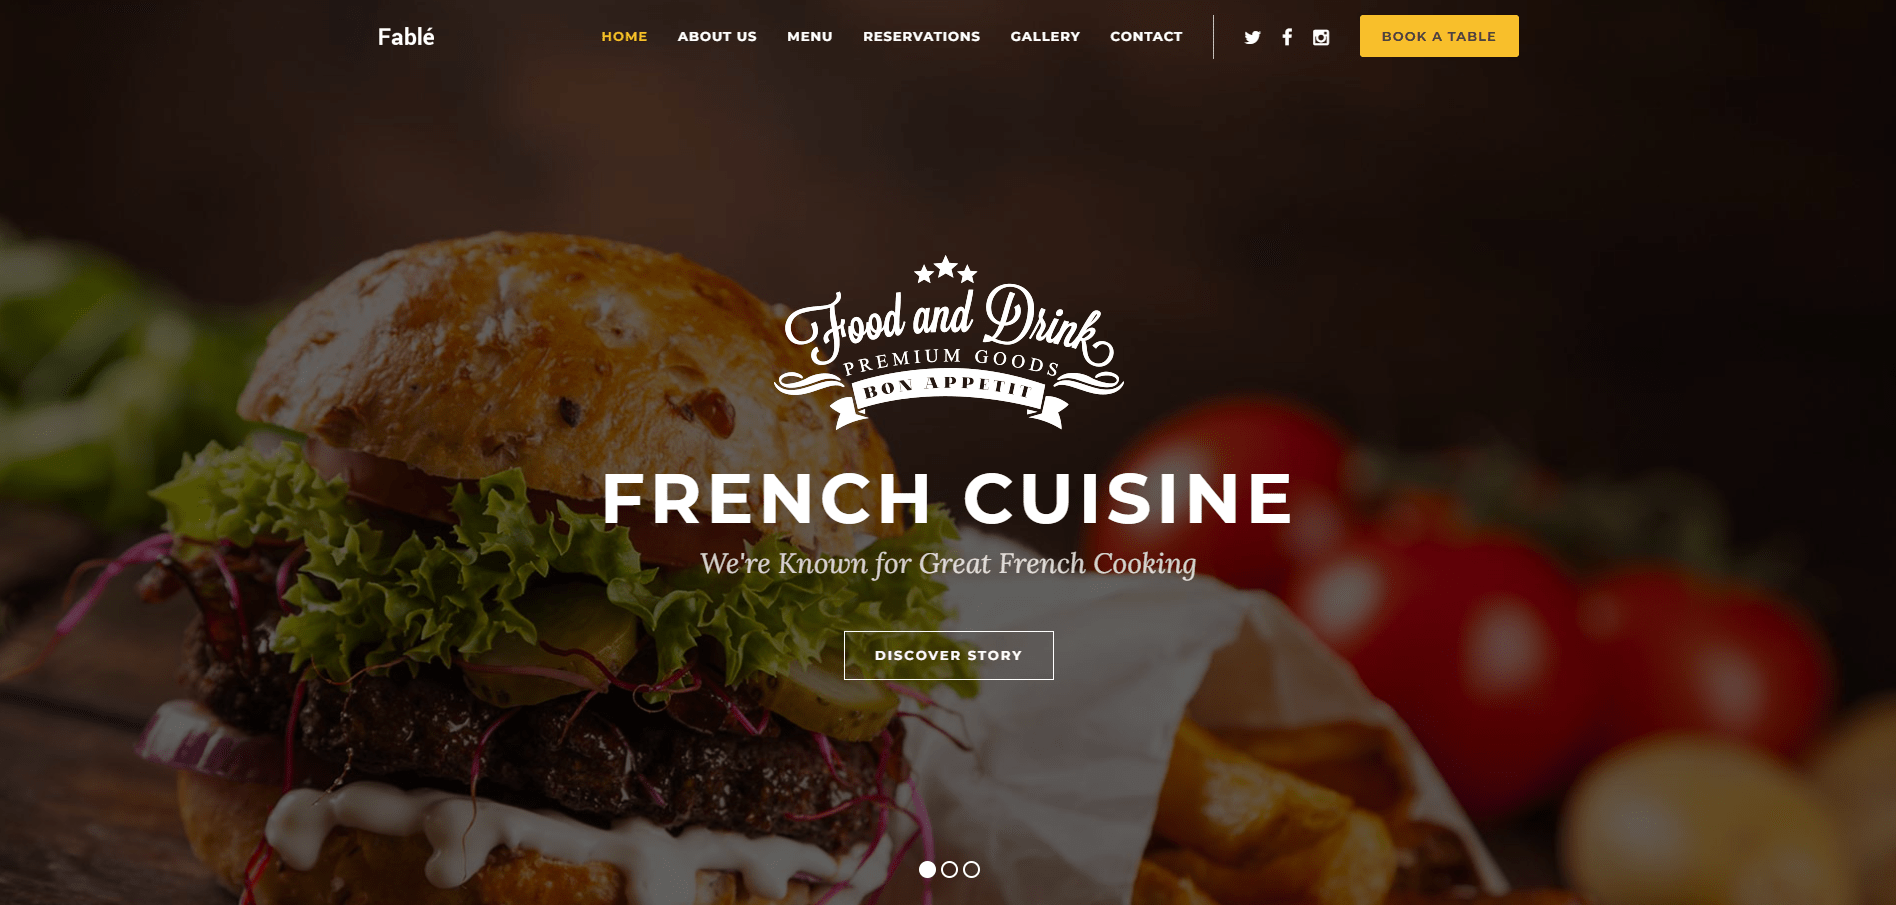 Fable - Bakery Coffee Pub Restaurant Site Template